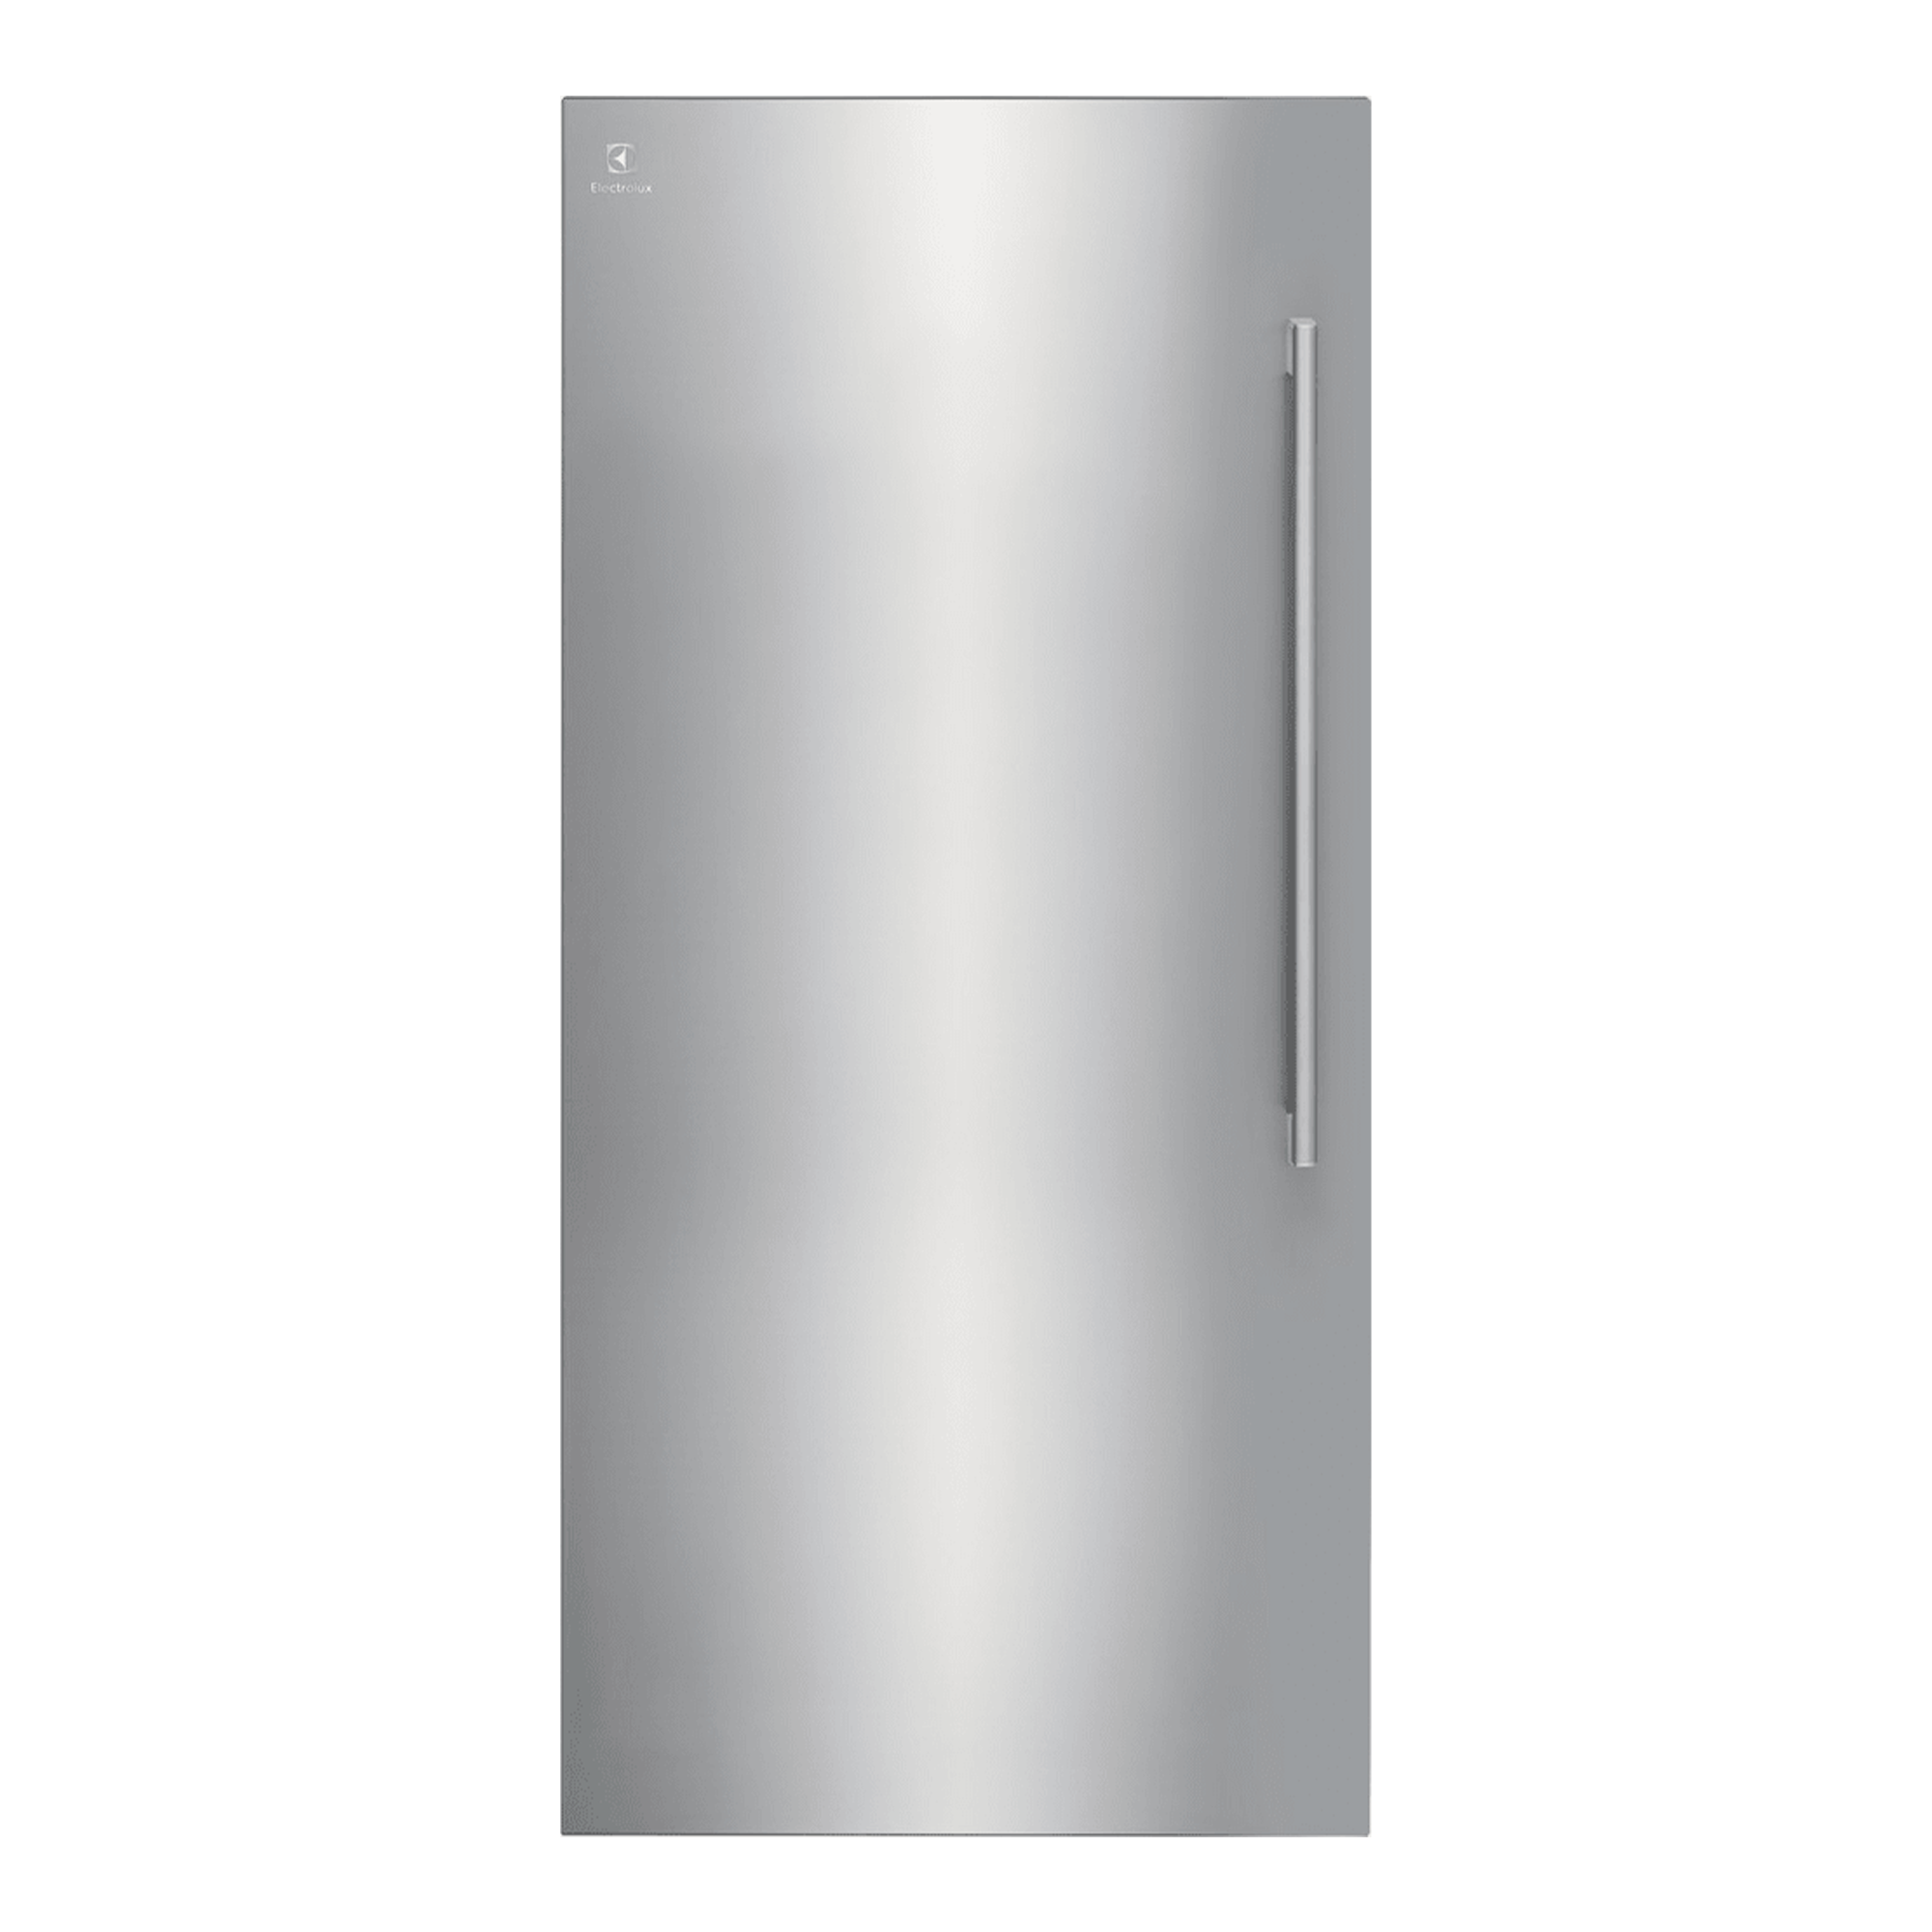 freezer stainless steel 33 inch